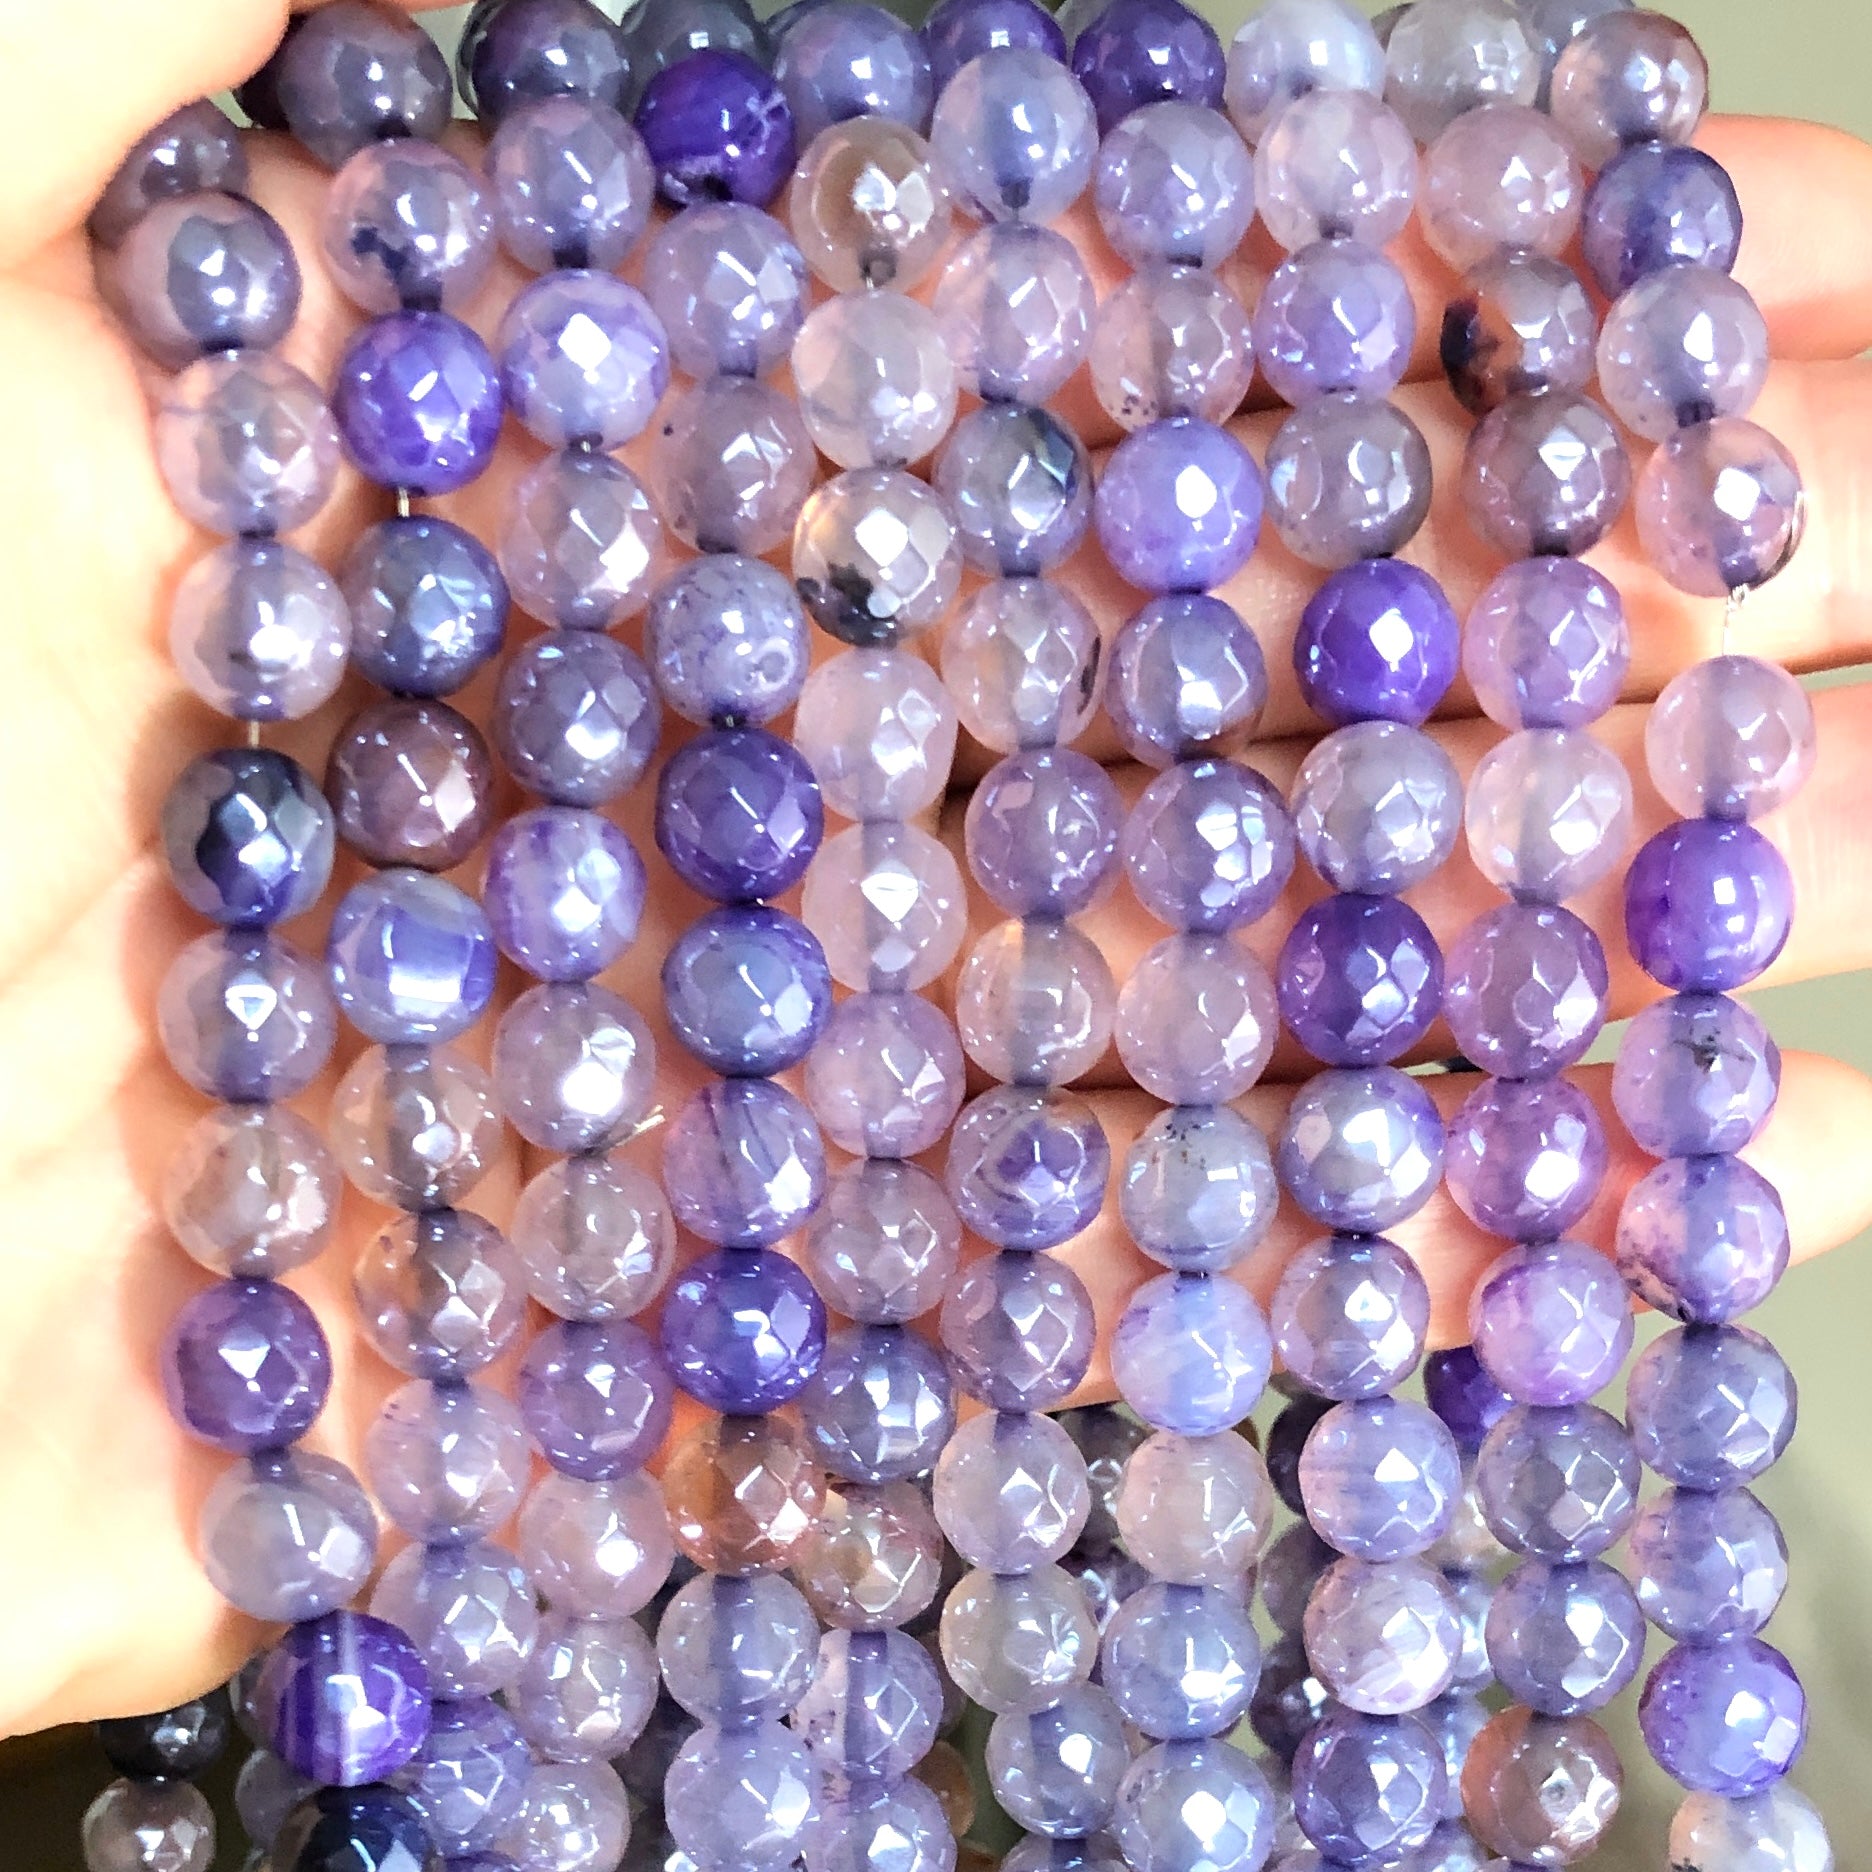 2 Strands/lot 8mm Electroplated Purple Agate Faceted Stone Beads Electroplated Beads Electroplated Faceted Agate Beads New Beads Arrivals Charms Beads Beyond